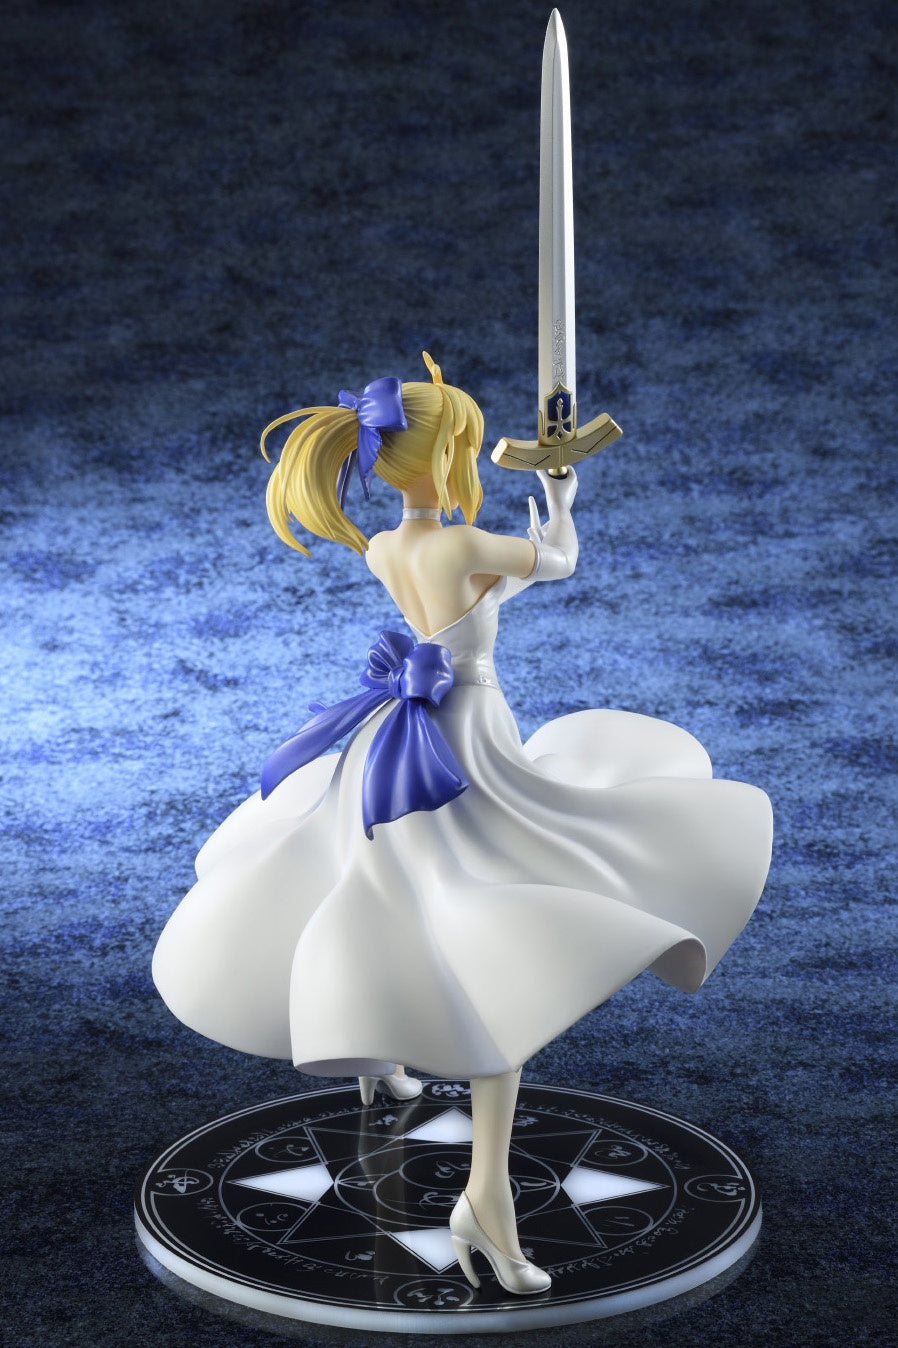 Fate/stay night [Unlimited Blade Works]: 1/8 Saber White Dress Renewal Ver. Figure